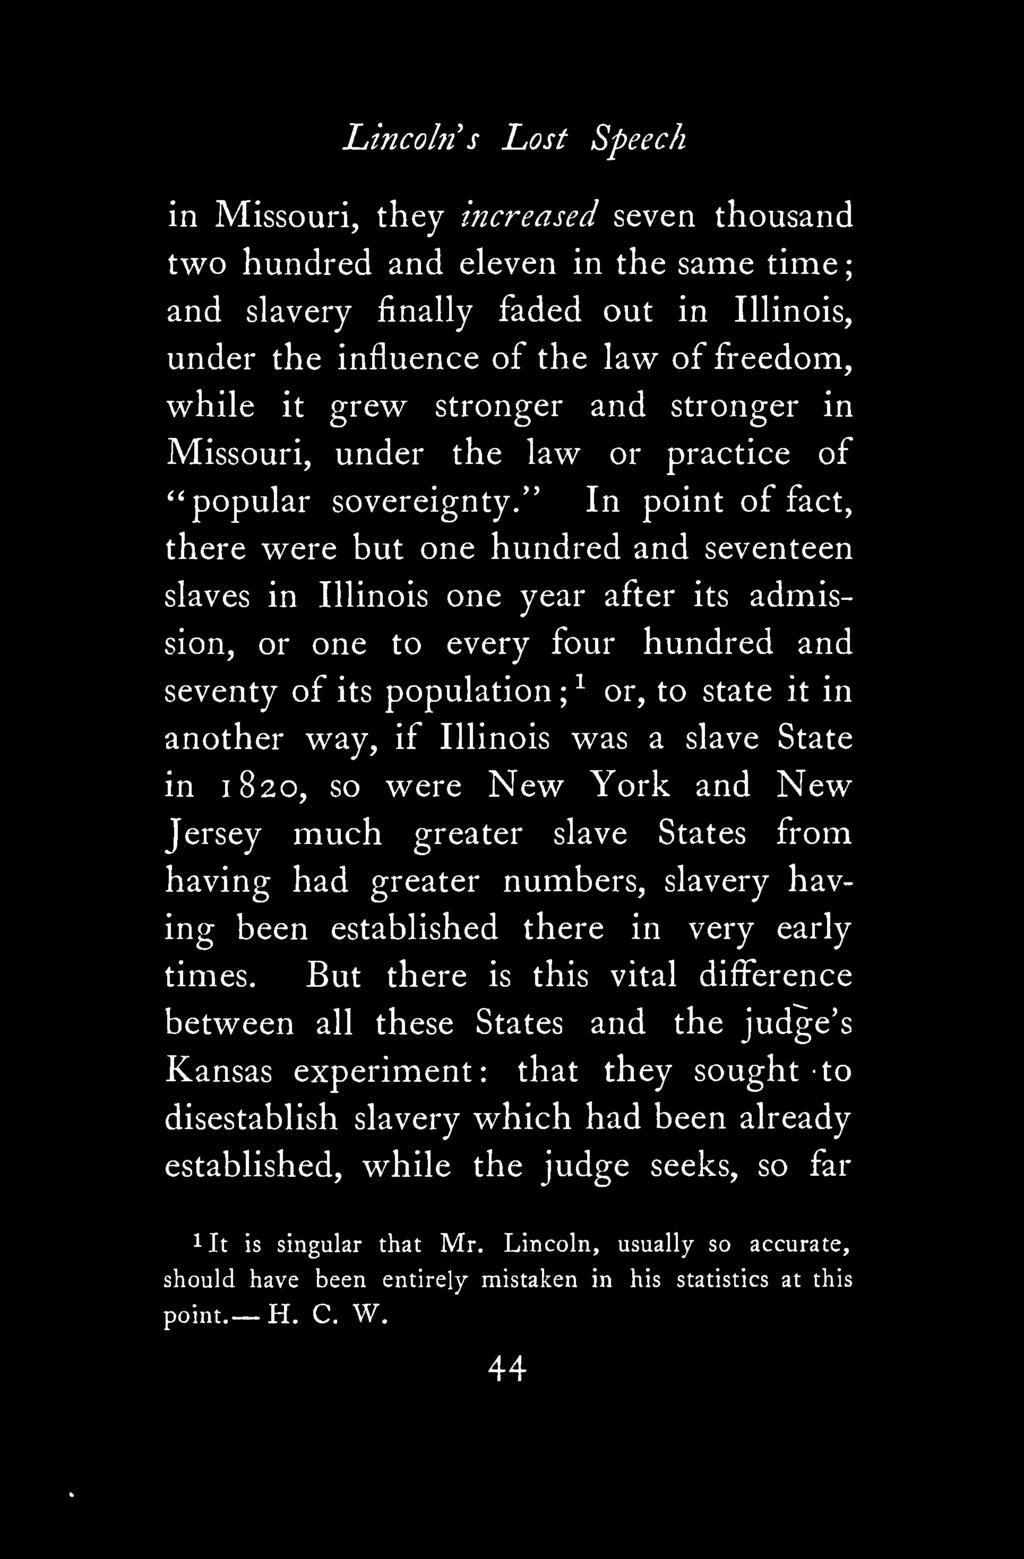 Lincoln s Lost Speech in Missouri, they increased seven thousand two hundred and eleven in the same time and slavery finally faded out in Illinois, under the influence of the law of freedom, while it